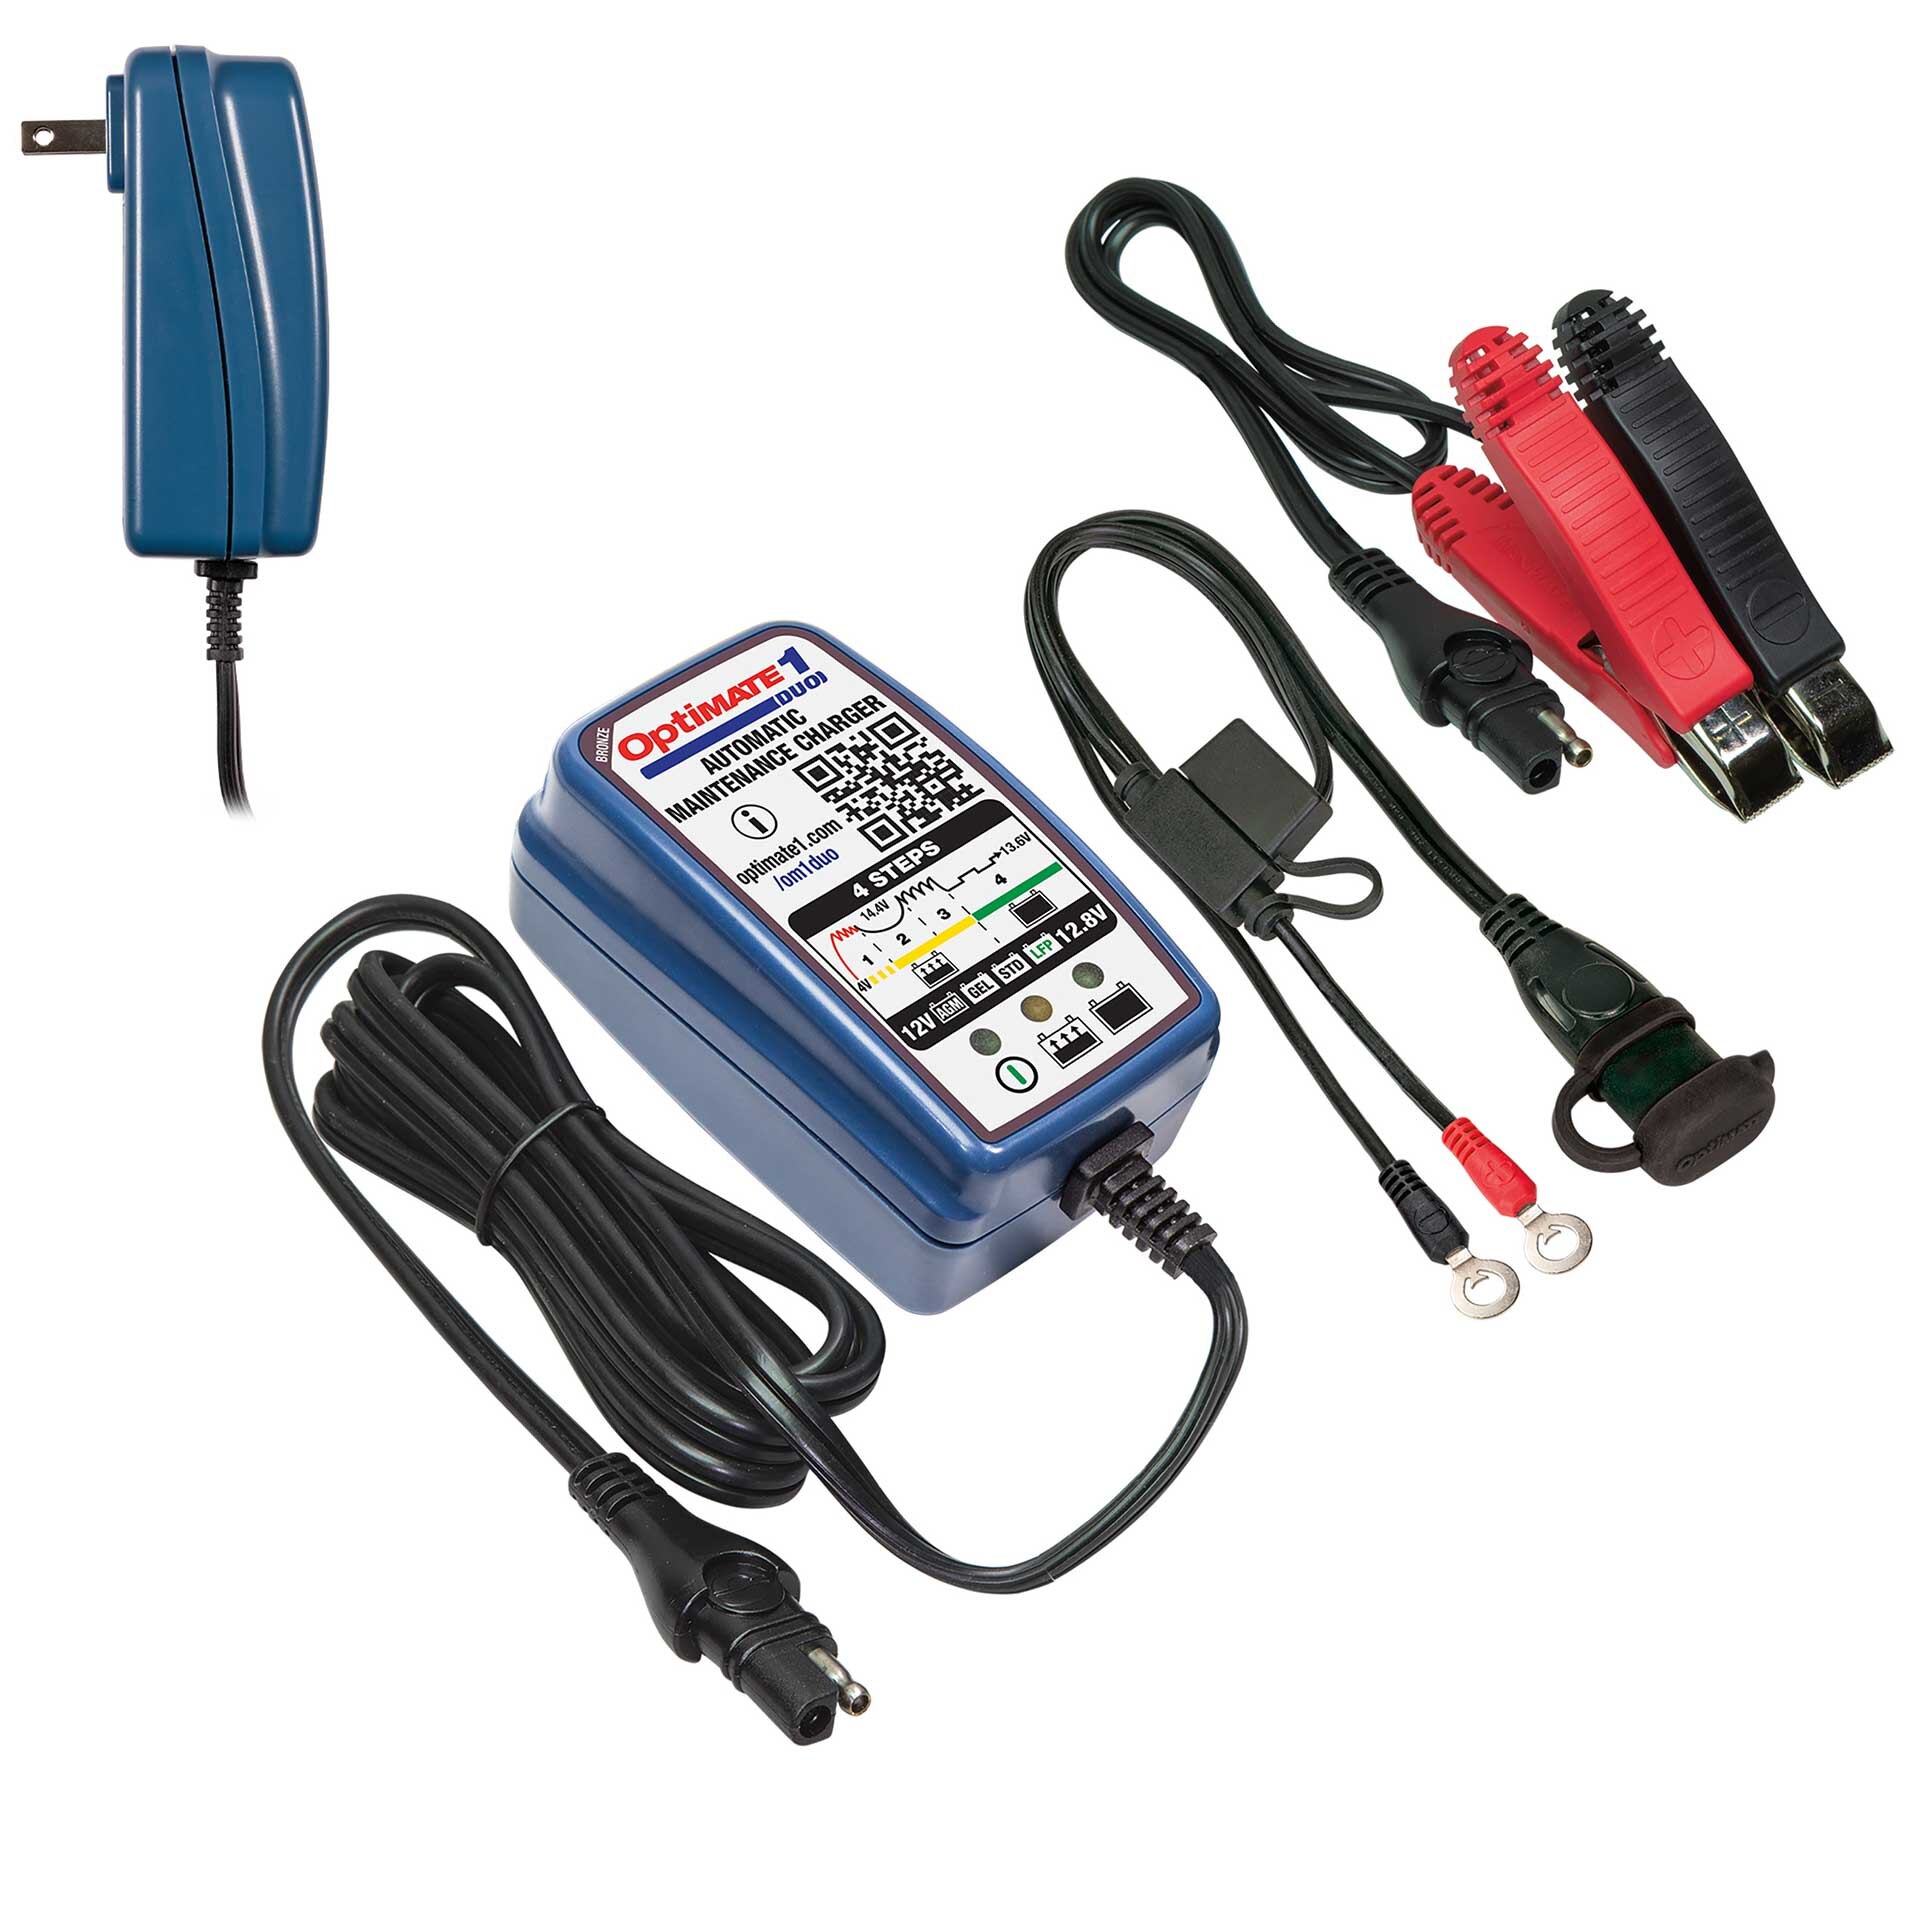 OptiMATE 1 VoltMatic Battery Charger